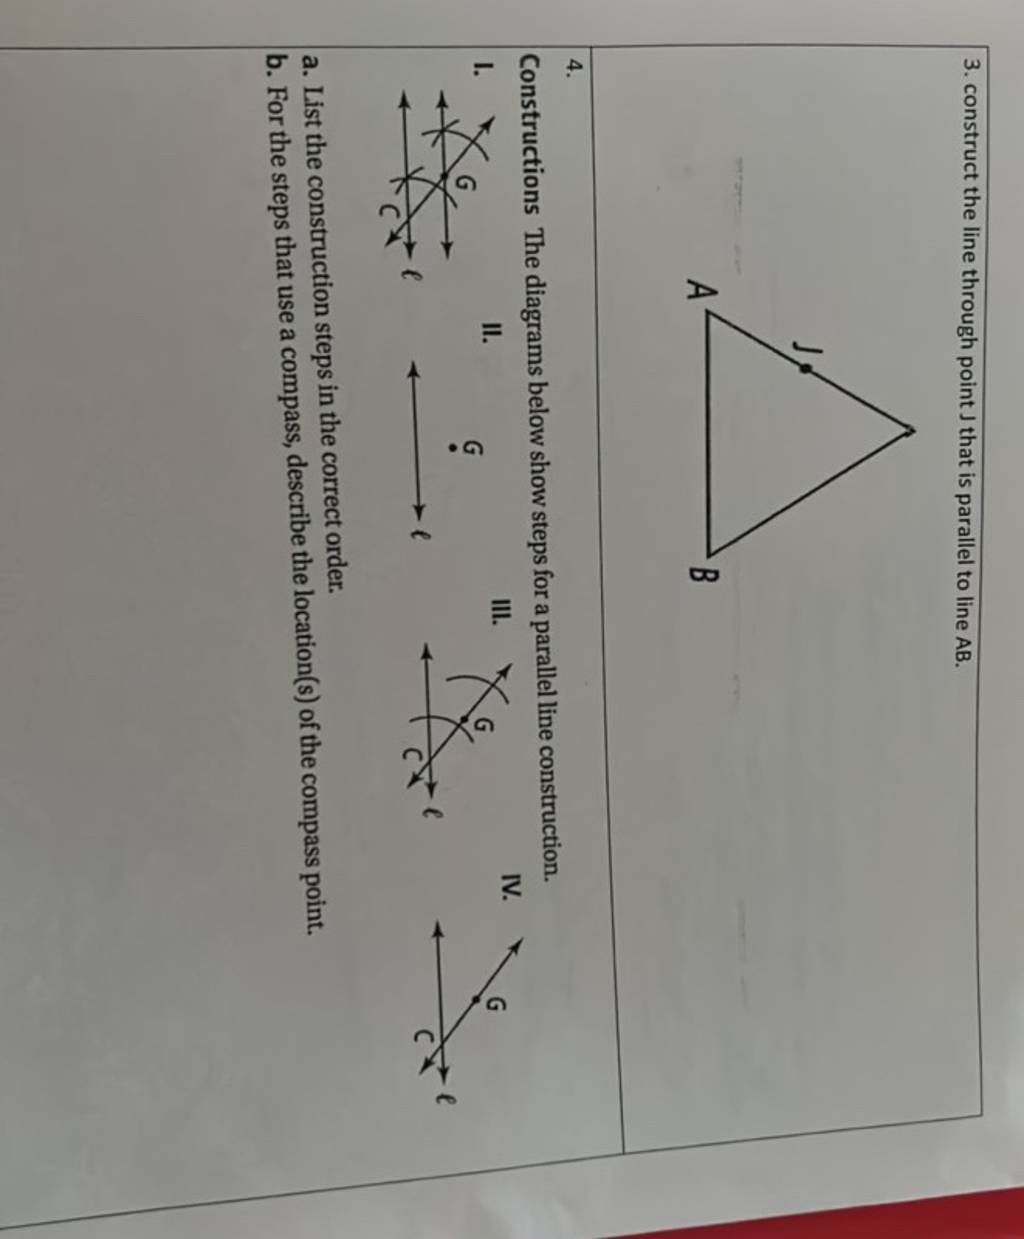 3. construct the line through point J that is parallel to line AB.
4. 